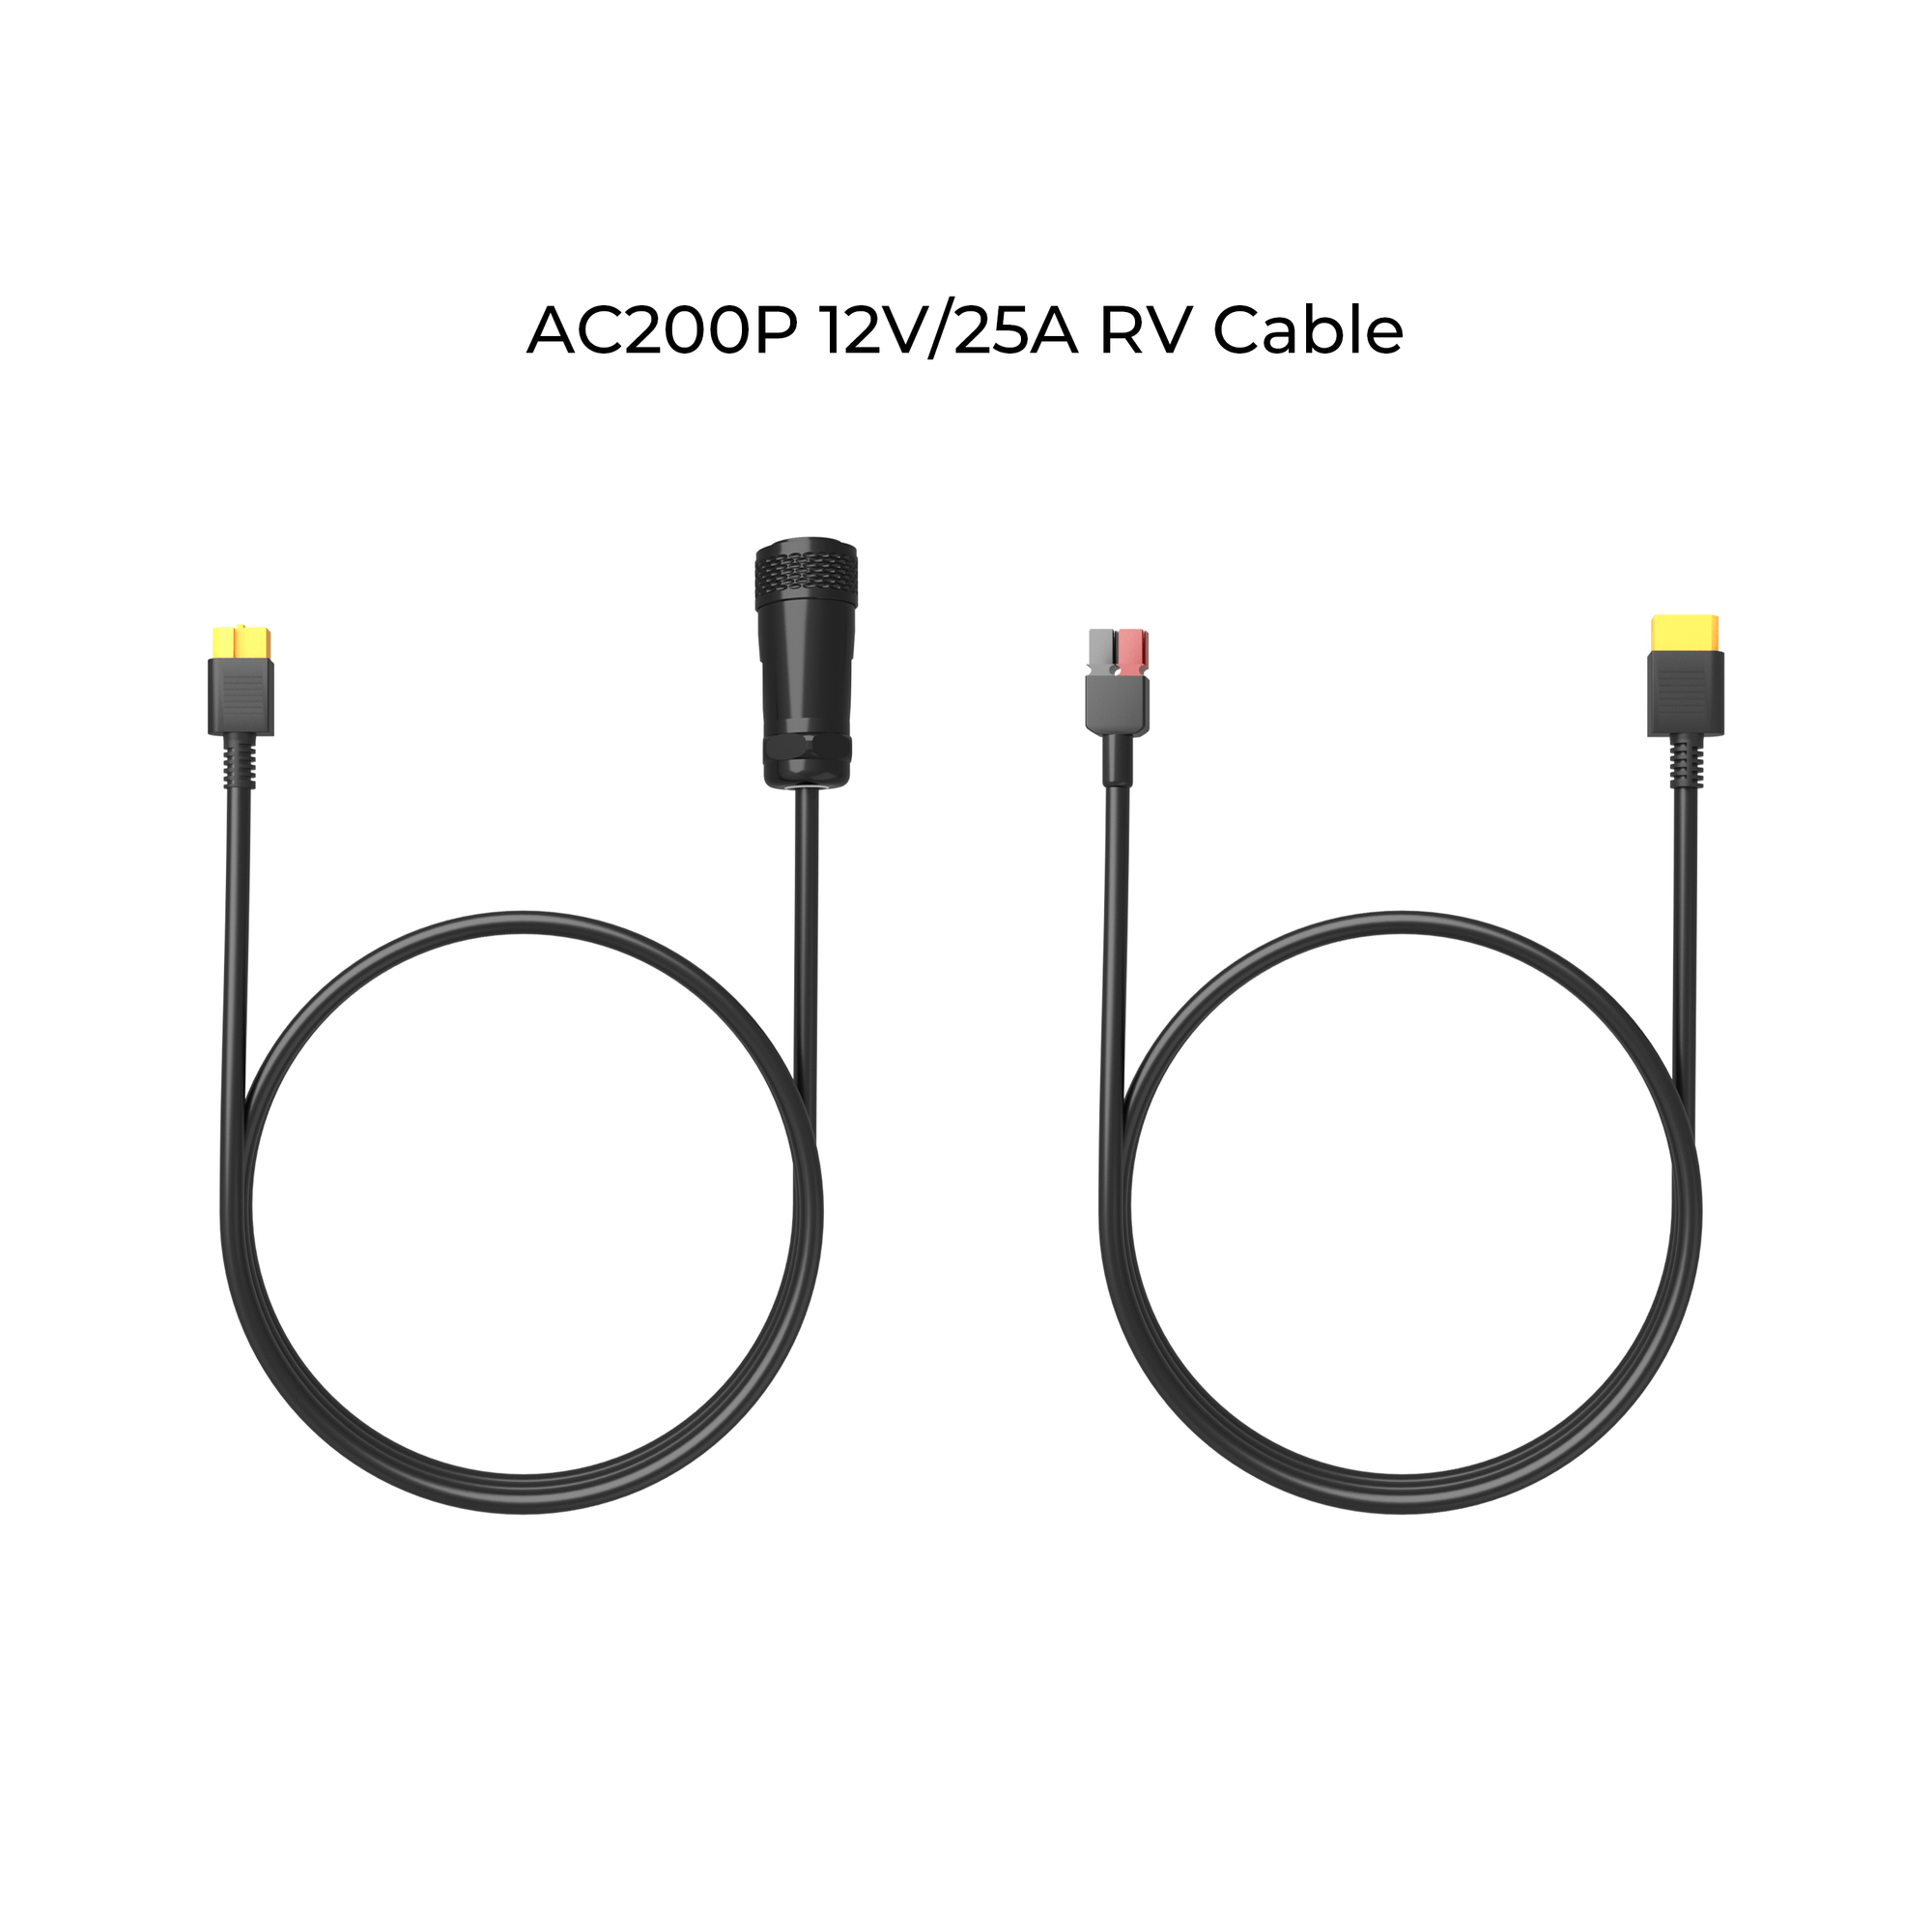 12V RV CABLE - LITHIUM BATTERY CO